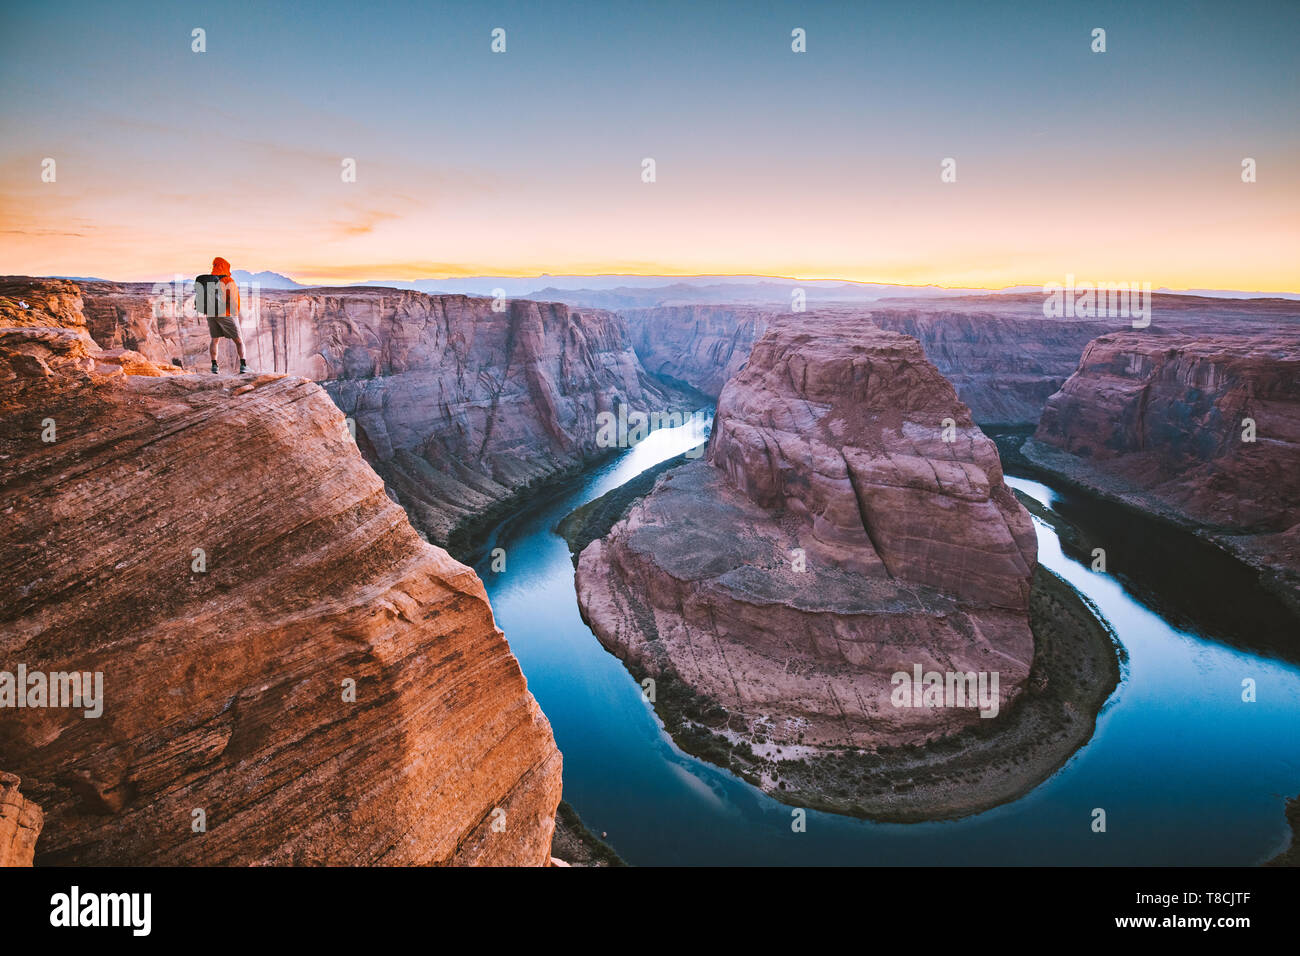 A male hiker is standing on steep cliffs enjoying the beautiful view of Colorado river flowing at famous Horseshoe Bend at sunset, Arizona, USA Stock Photo